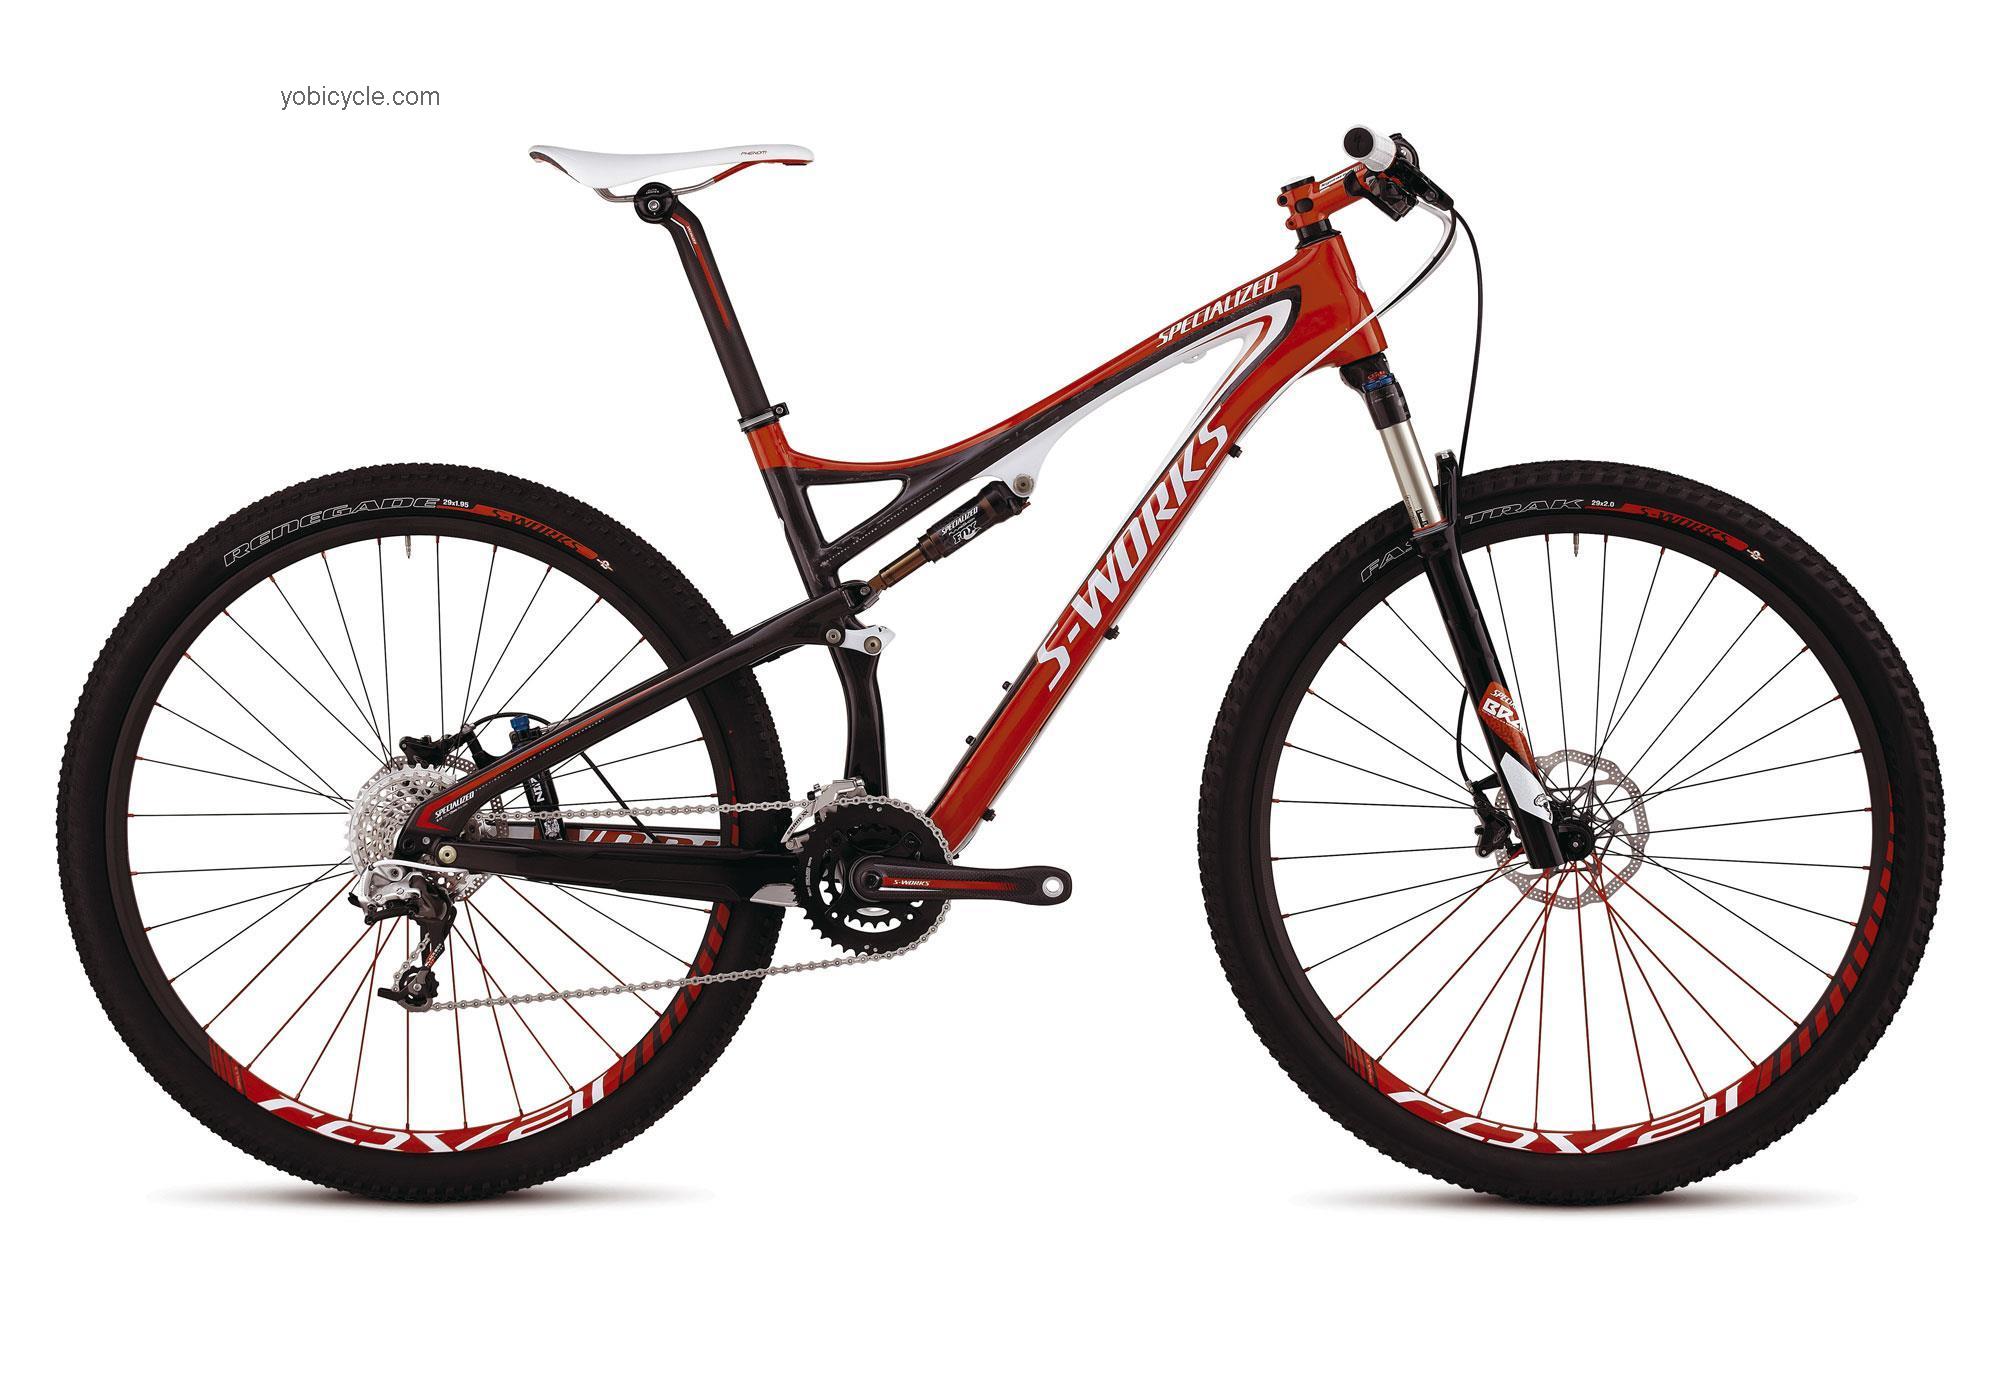 Specialized S-Works Epic FSR Carbon 29 SRAM 2012 comparison online with competitors